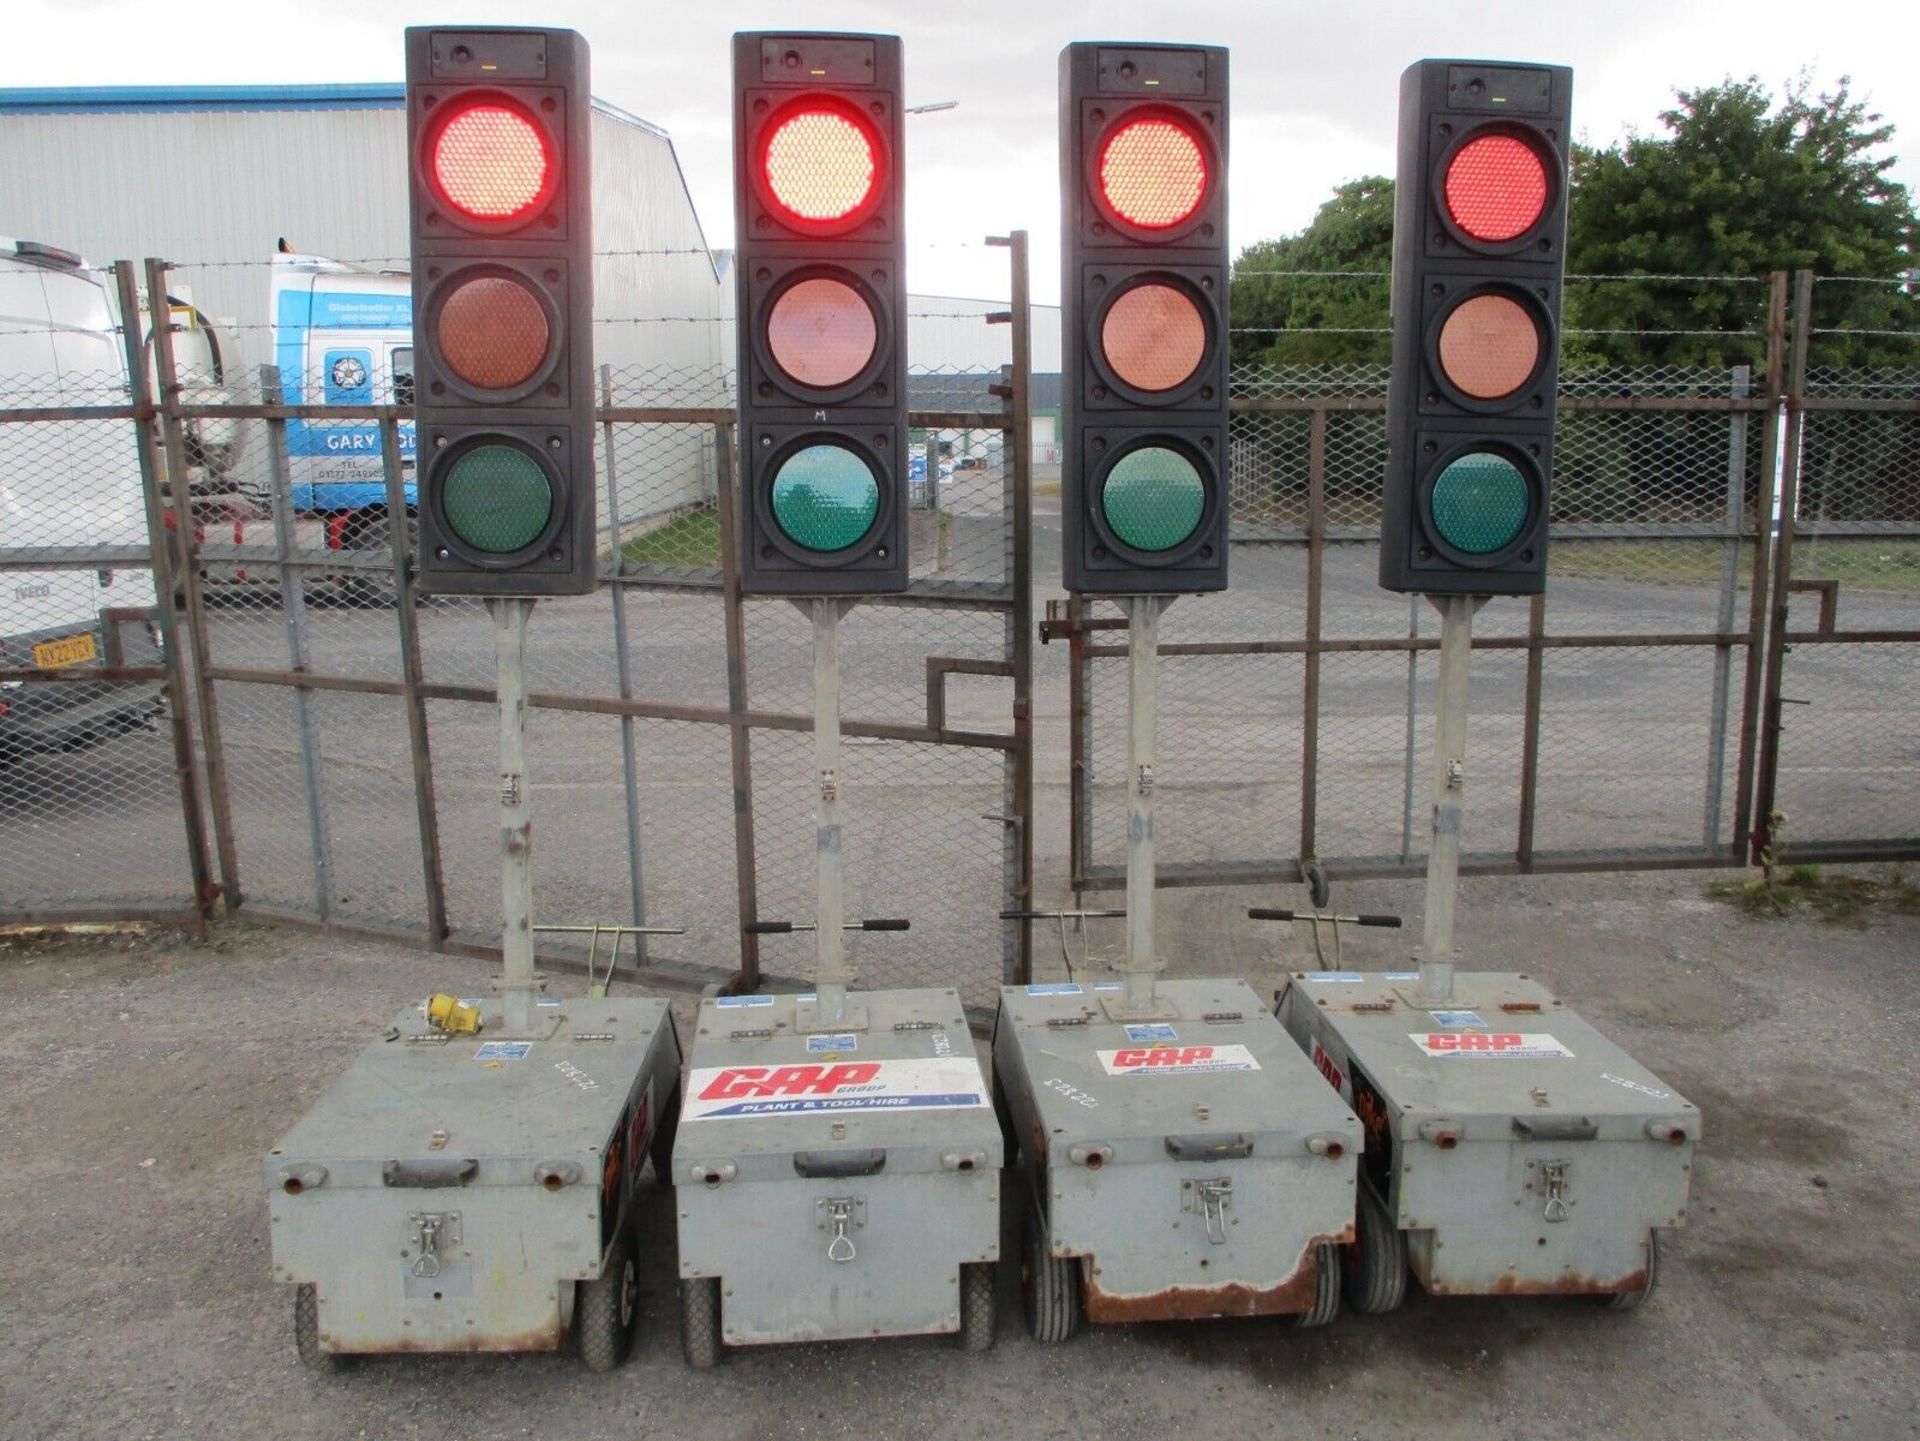 PIKE 4 WAY TRAFFIC LIGHTS XL2 CONTROLLERS - Image 3 of 4